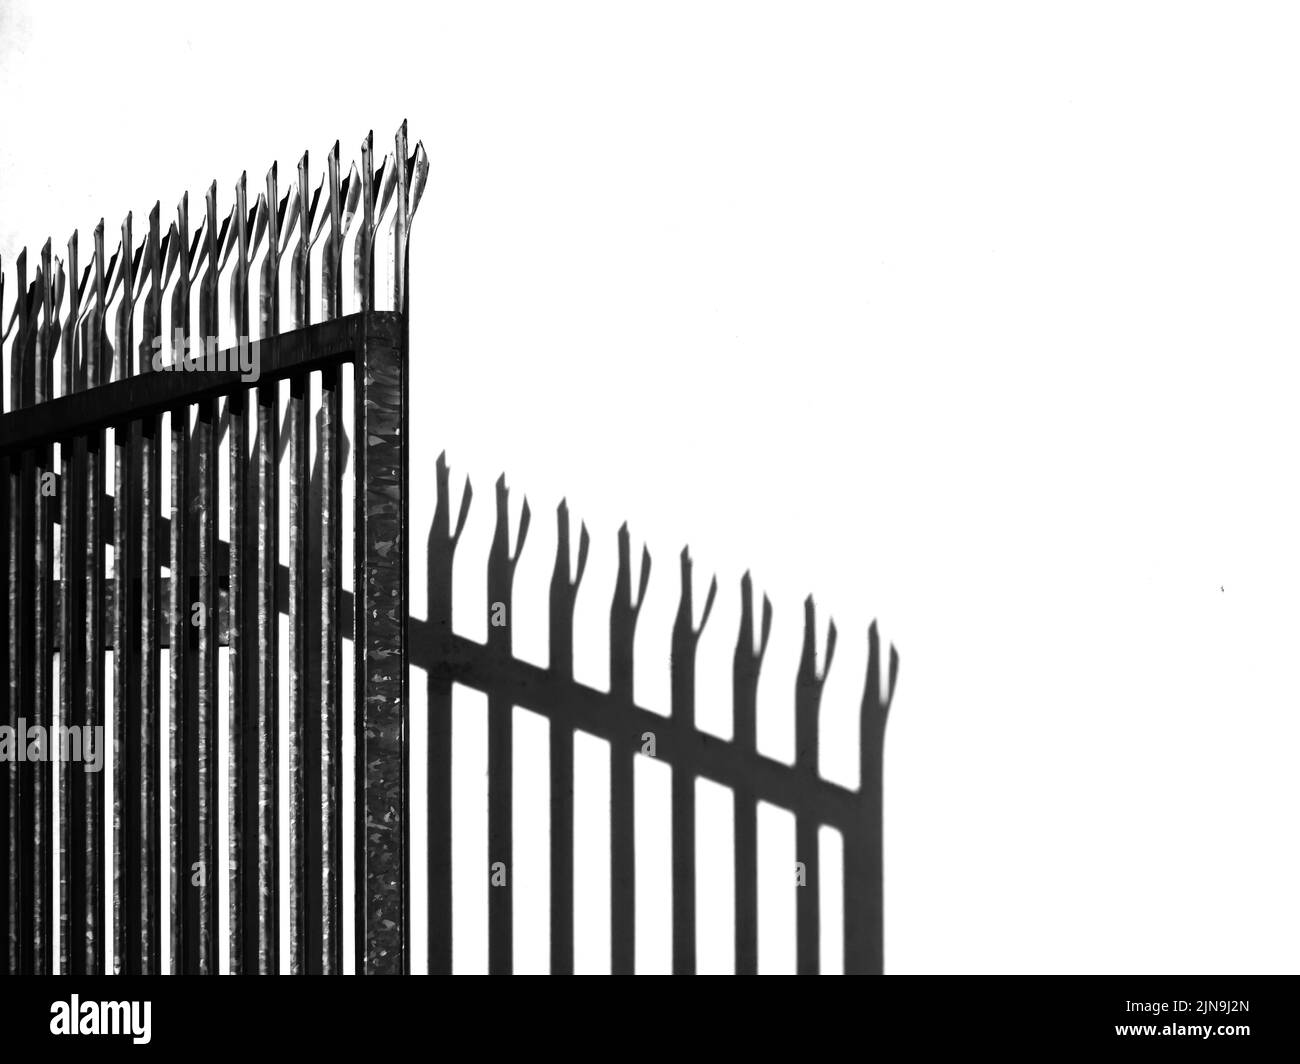 Spiked and barbed metal gate in fence with shadow. Security concept, background. Stock Photo